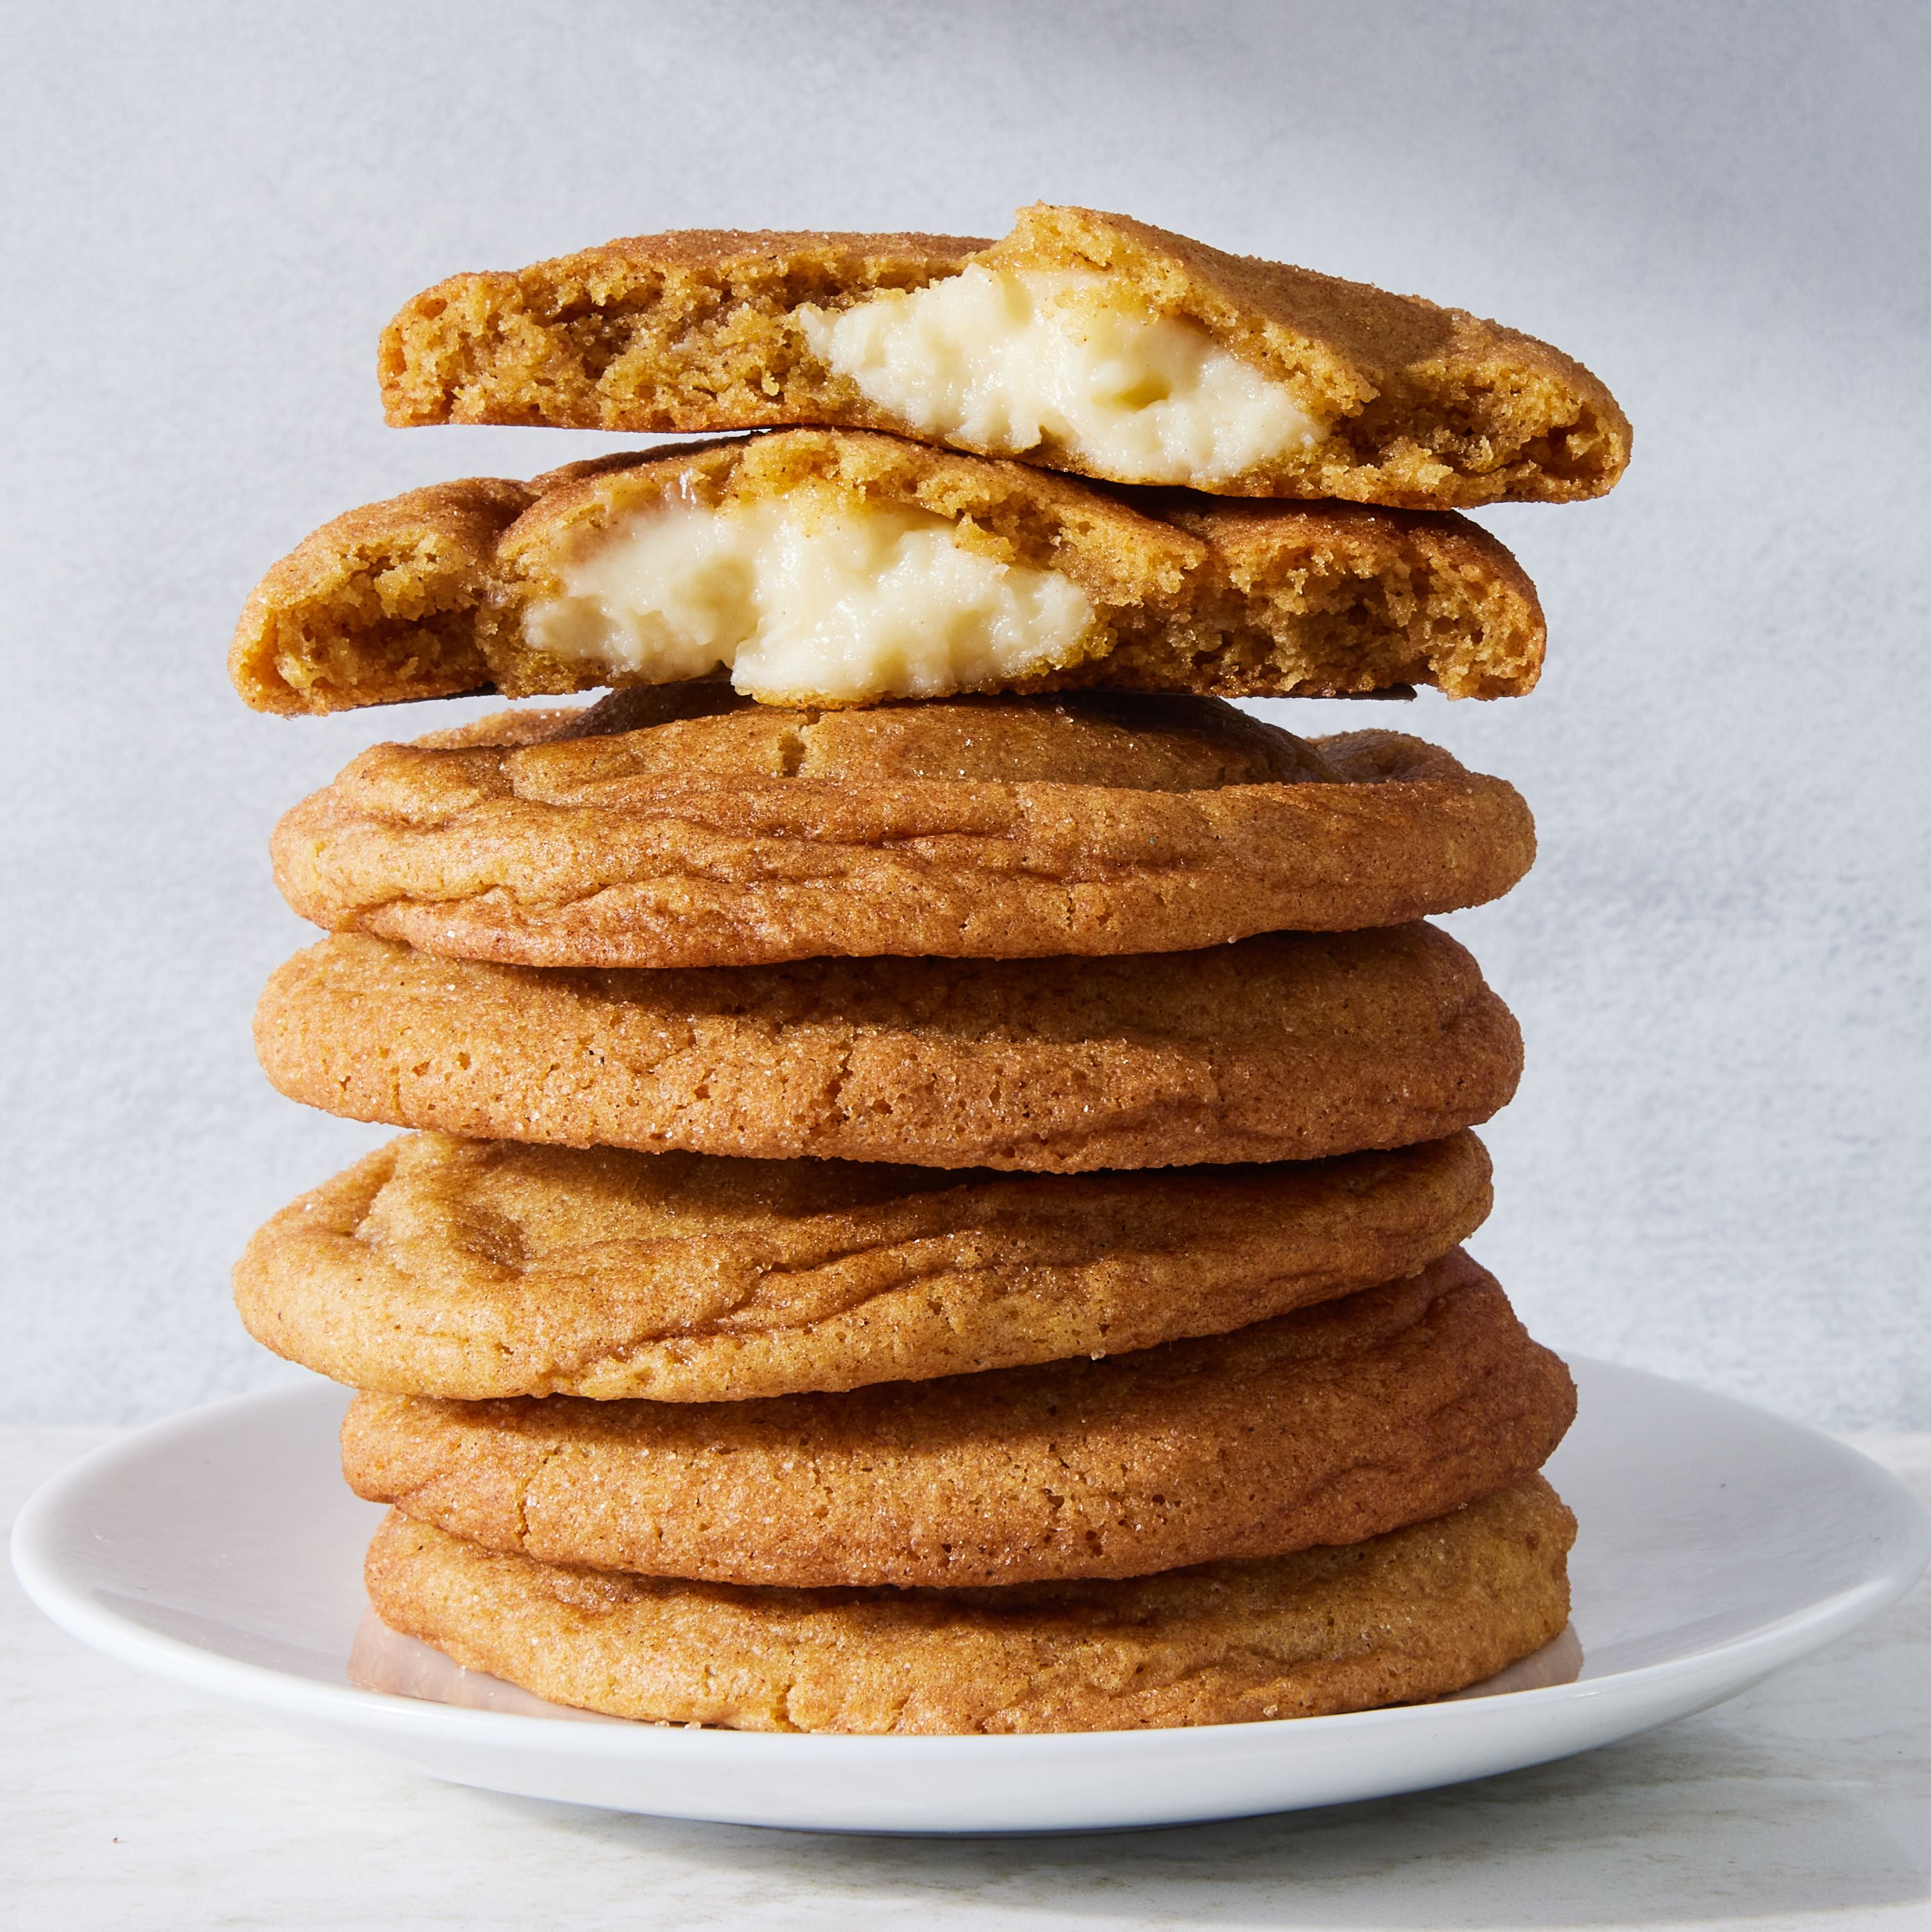 Slice and Bake Fall Cookie Recipes